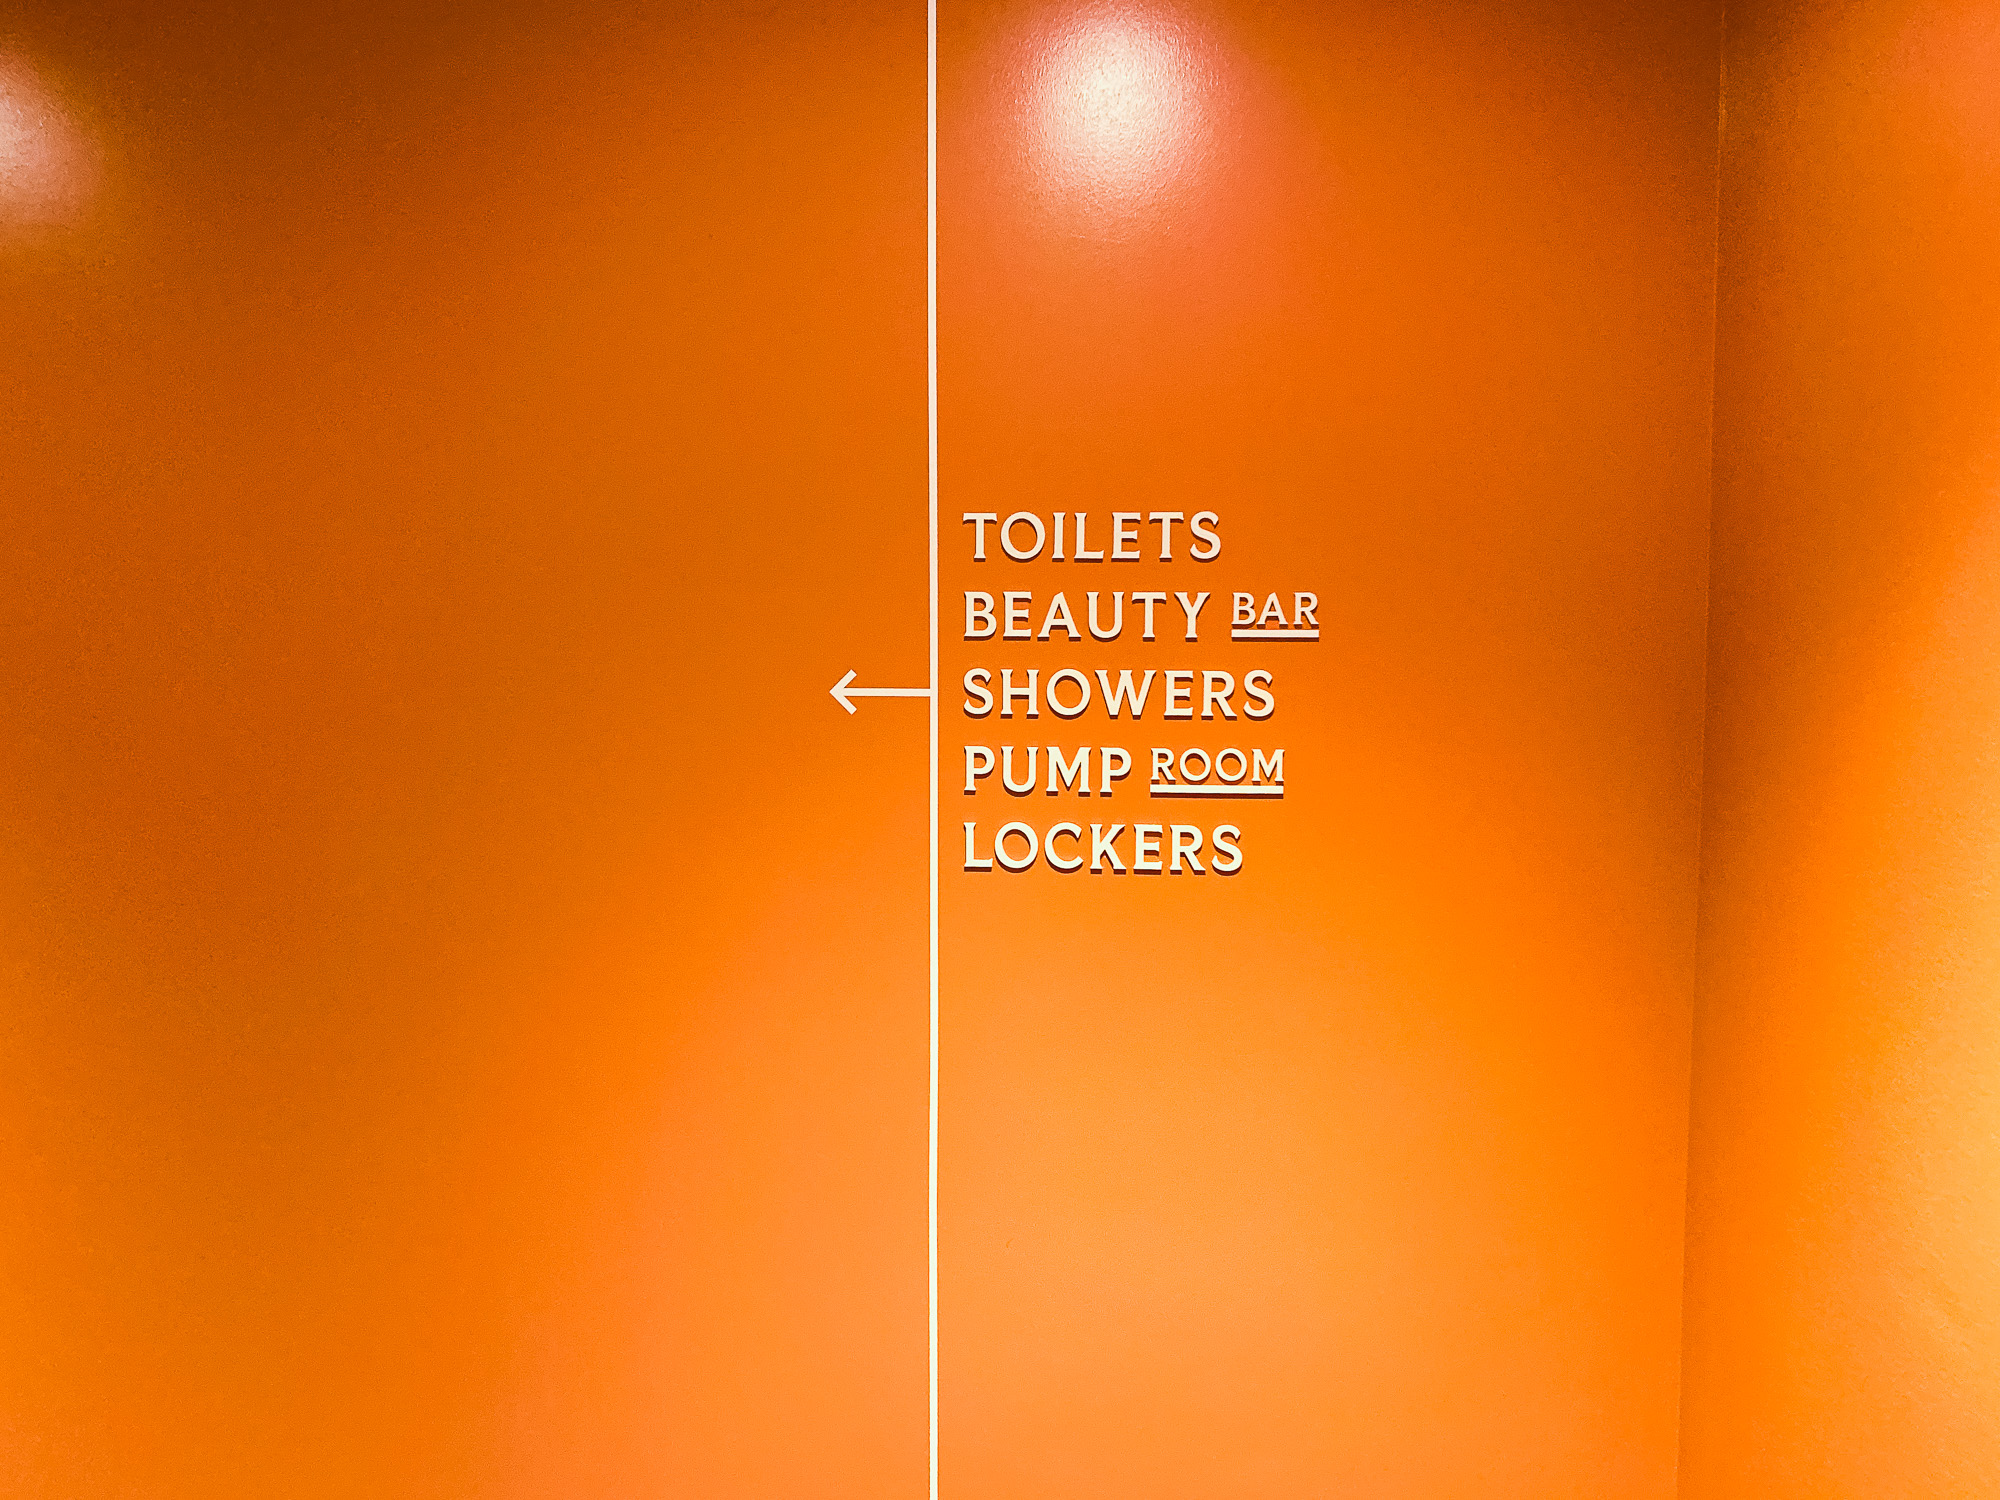 Cream colored, typographic wayfinding sign on orange wall for The Wing, a co-working space in San Francisco.